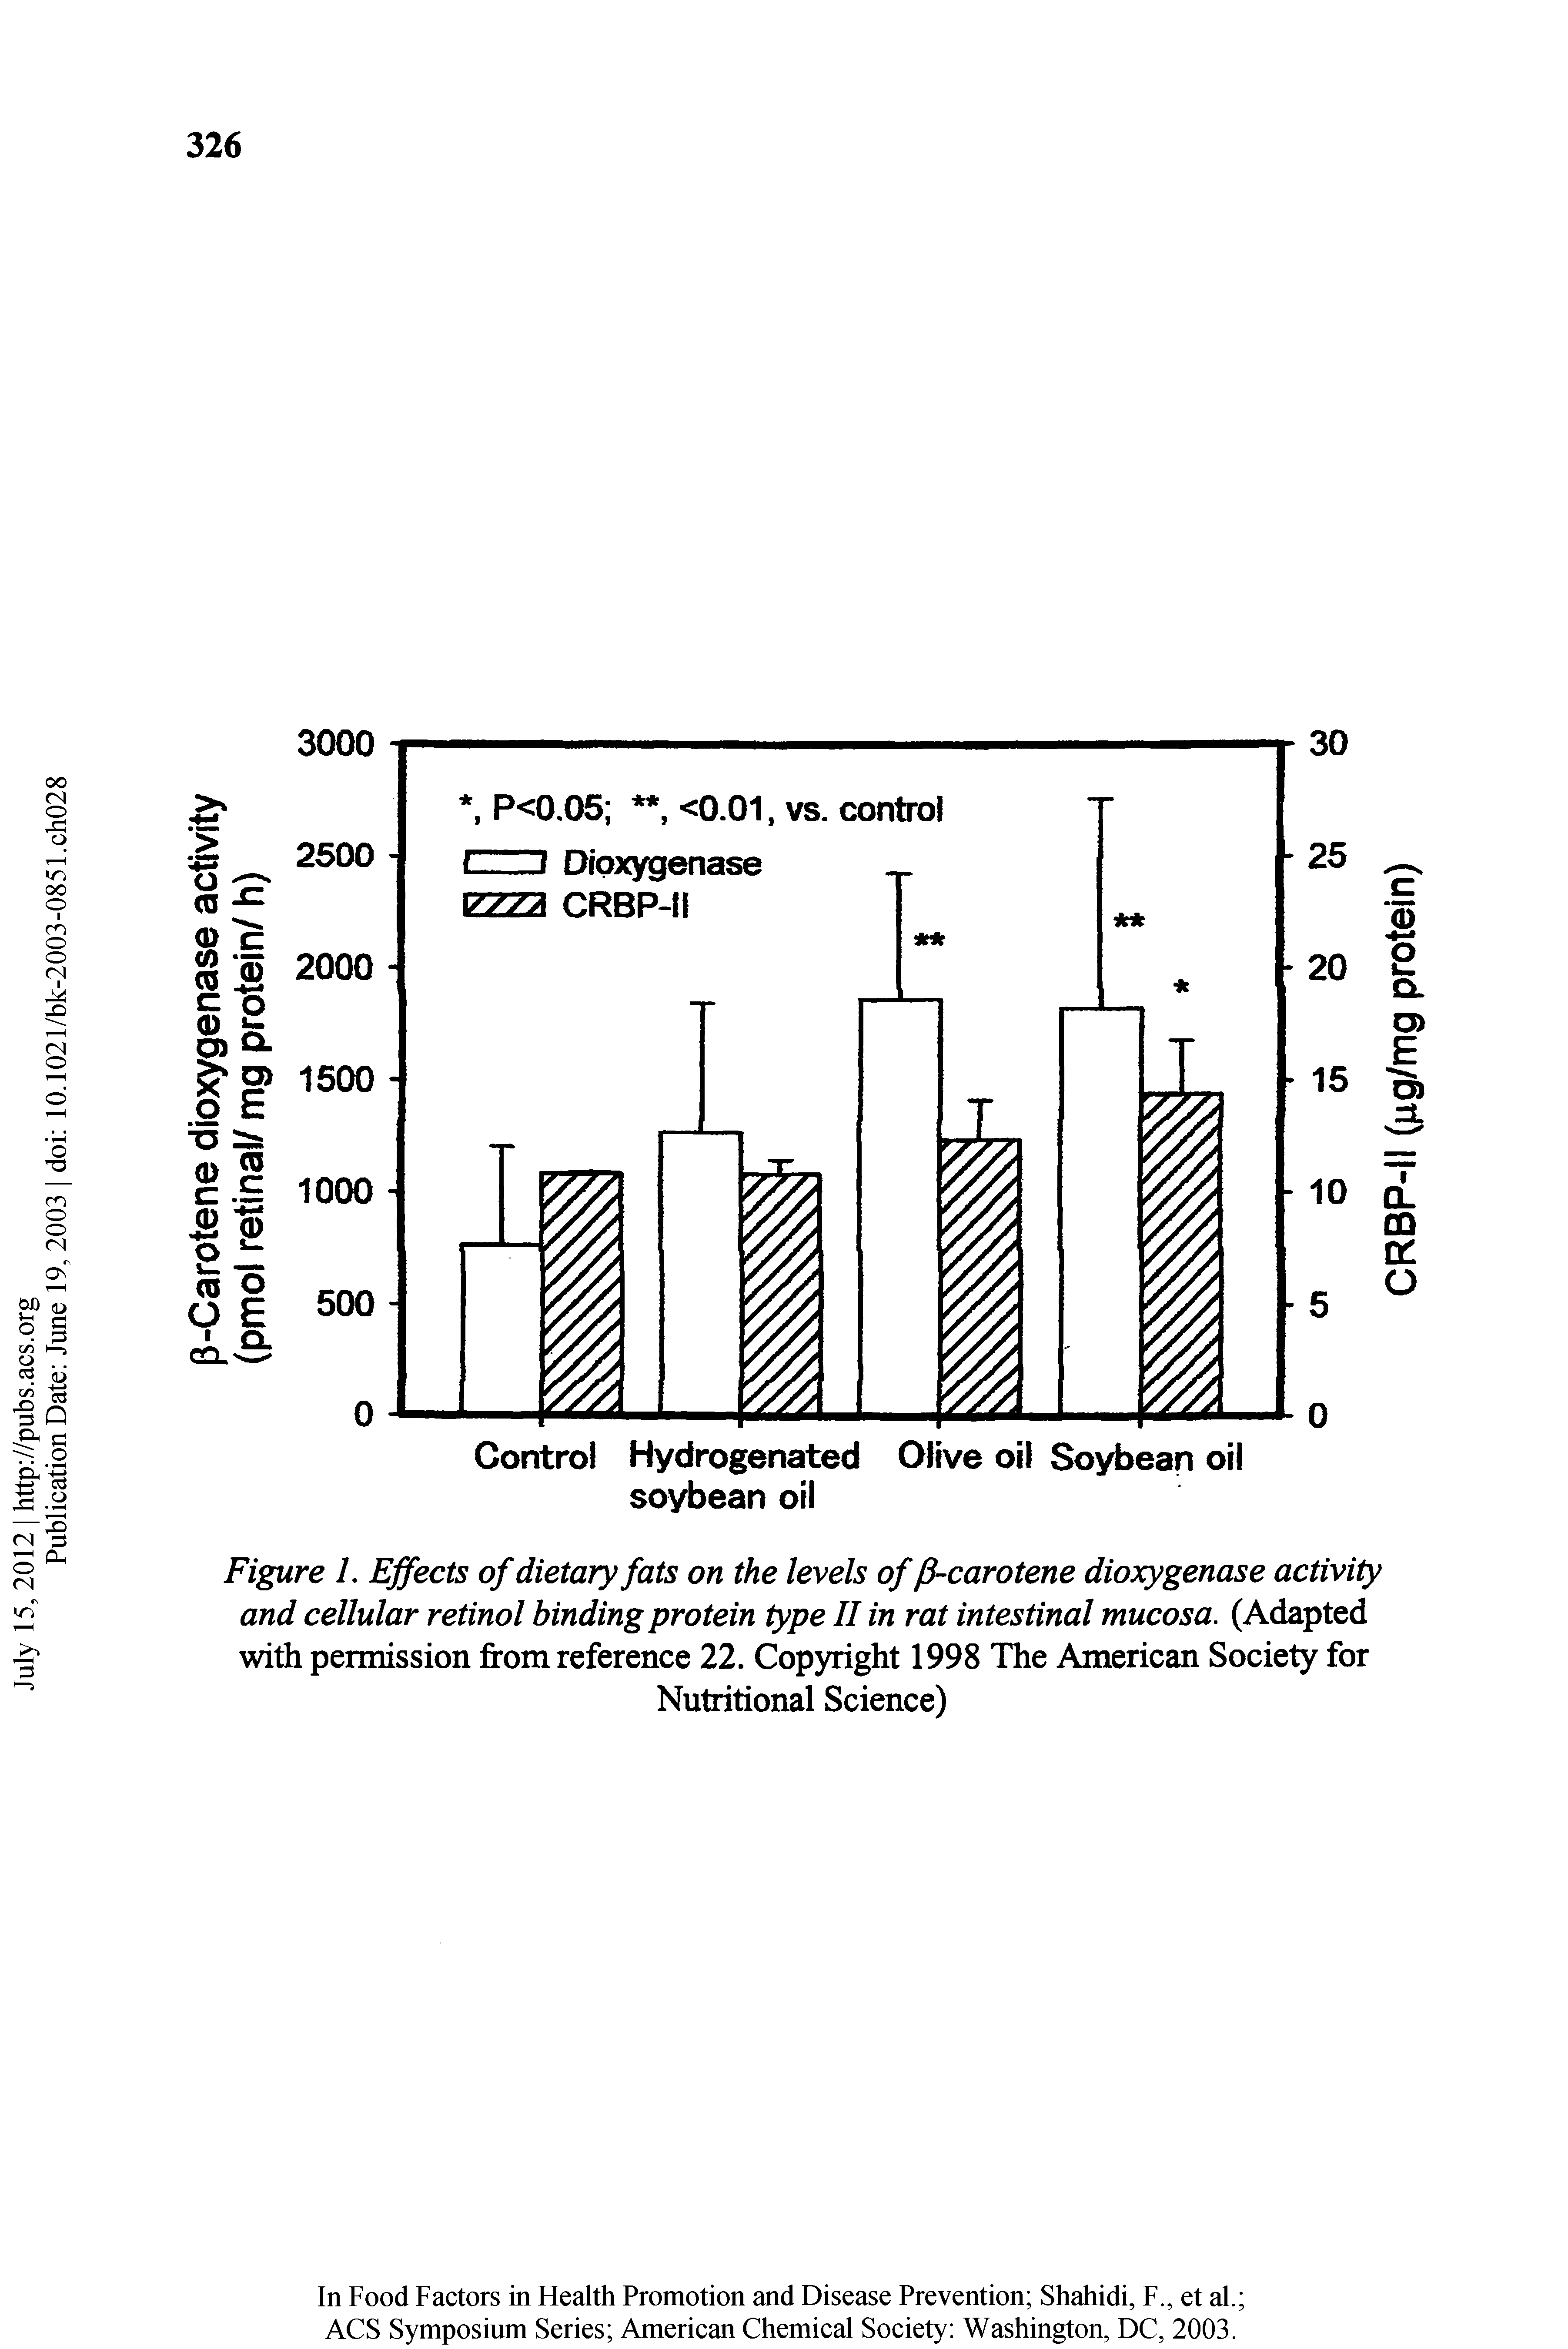 Figure L Effects of dietary fats on the levels of -carotene dioxygenase activity and cellular retinol binding protein type II in rat intestinal mucosa. (Adapted with permission from reference 22. Copyright 1998 The American Society for...